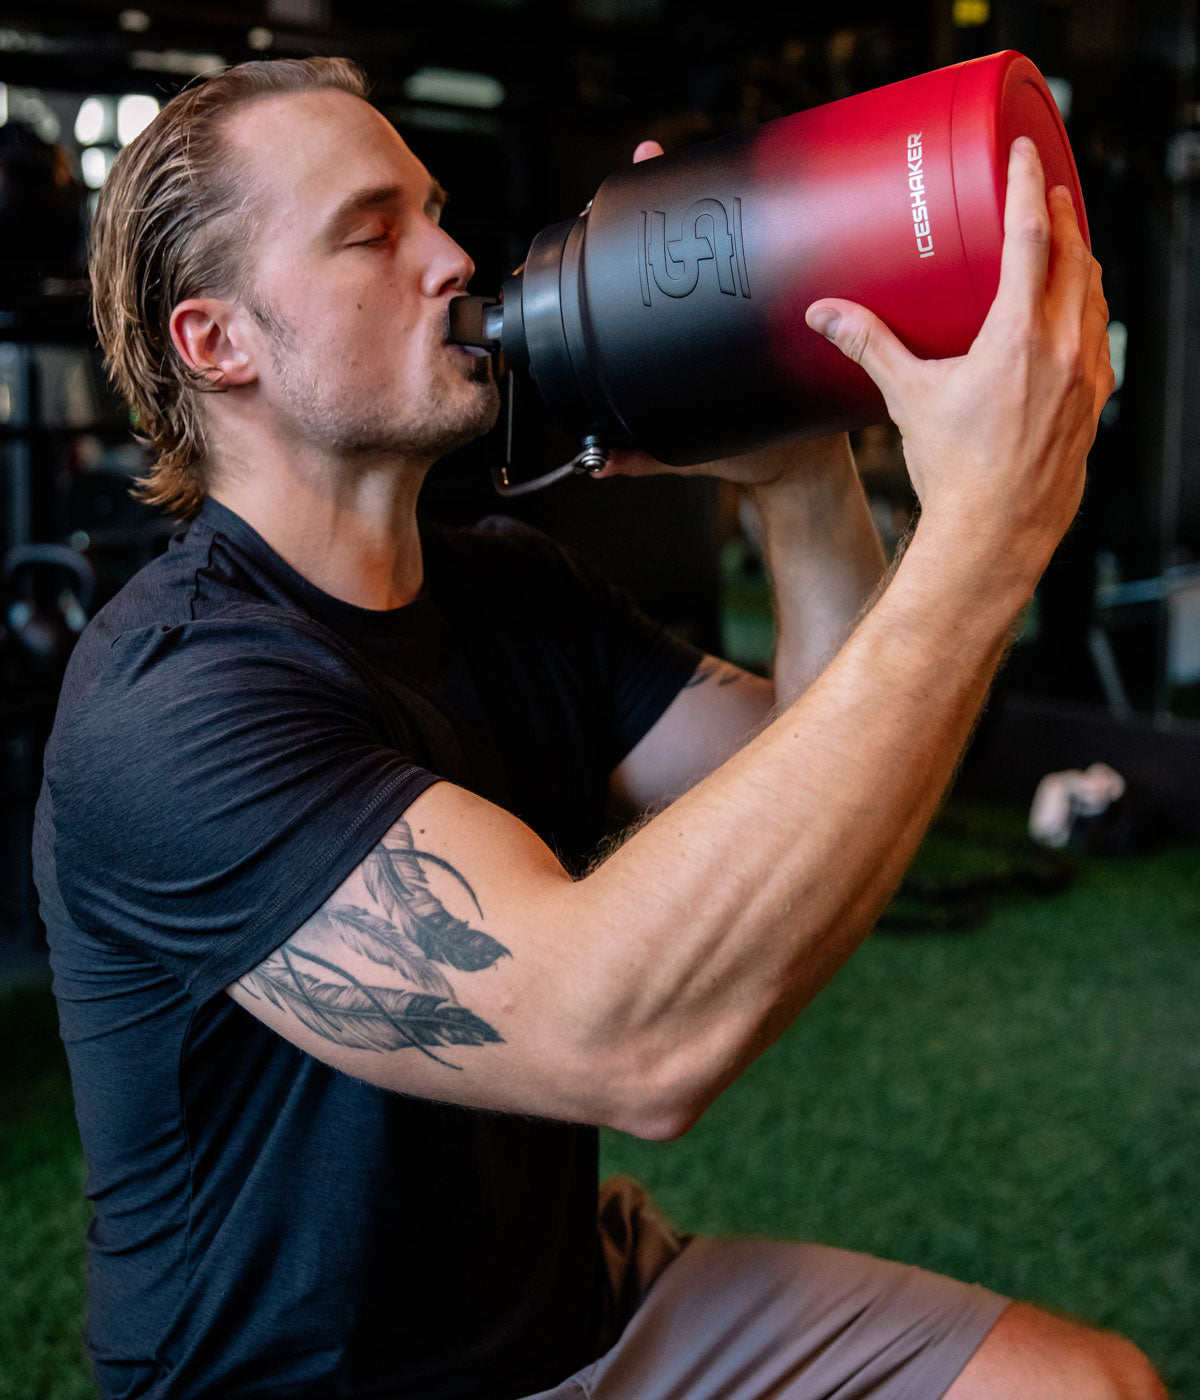 A man who has been working out takes a drink from a Red Black Ombre-colored One Gallon Jug.